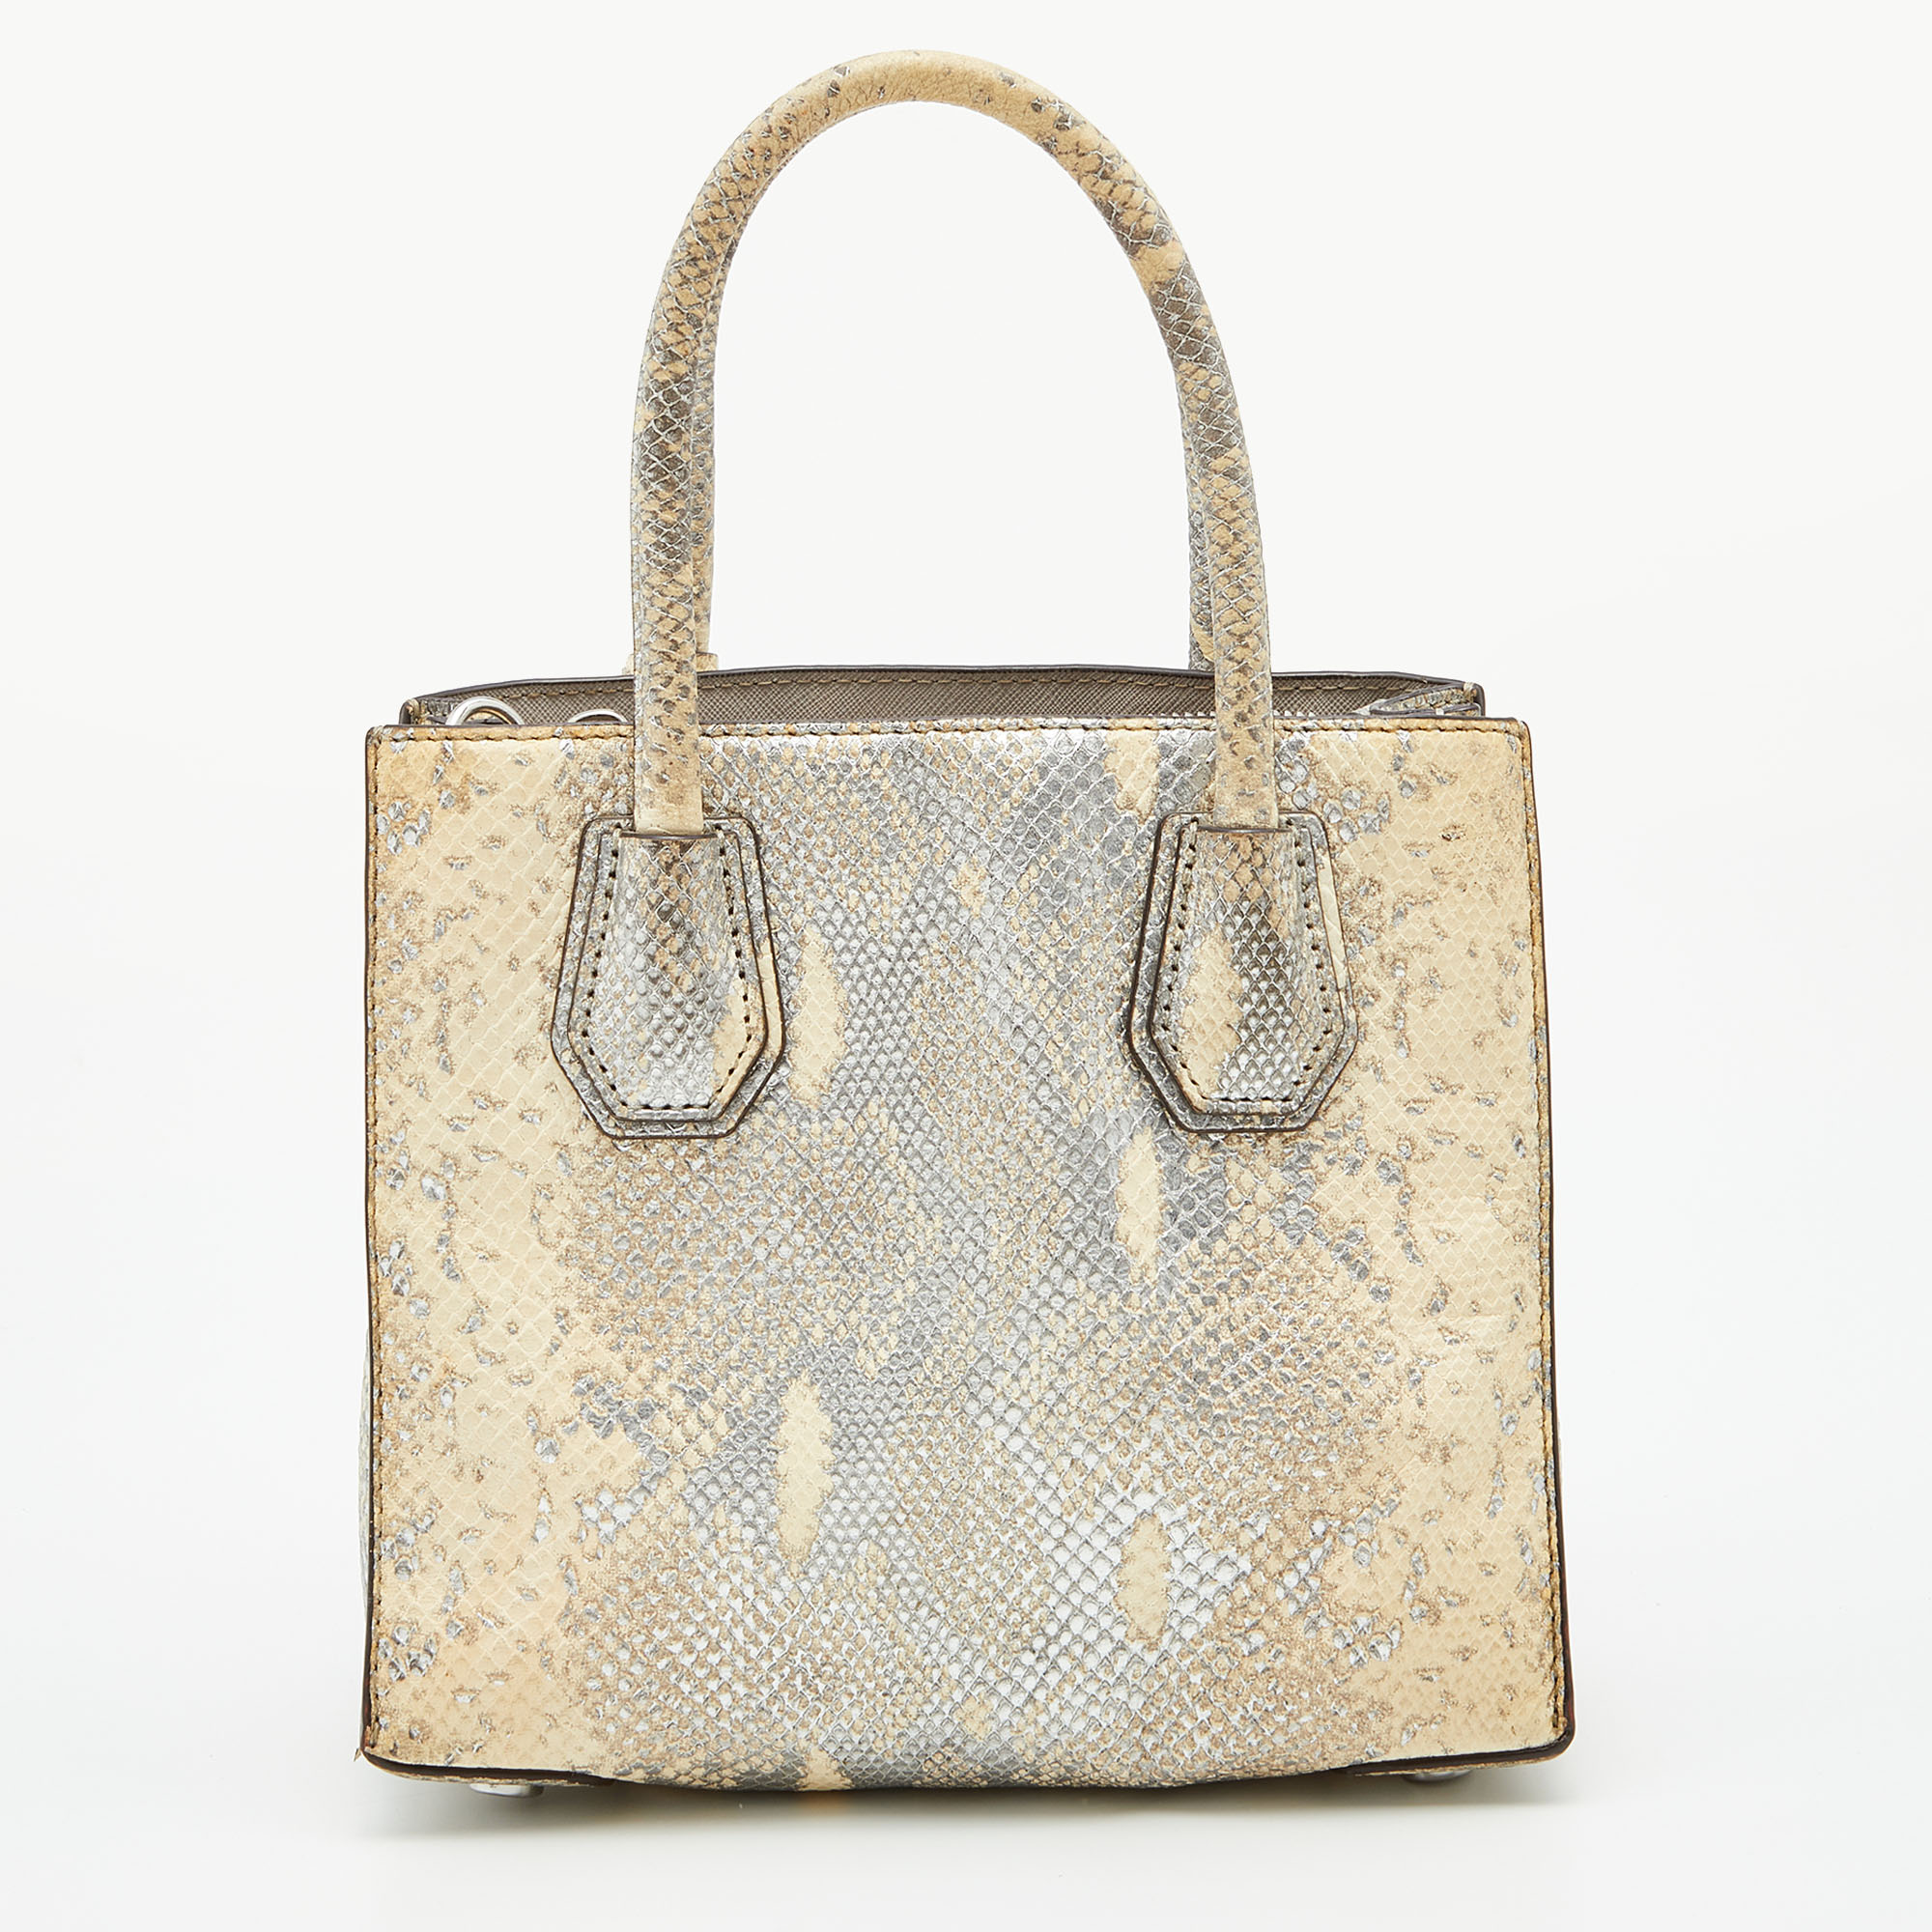 Michael Kors Beige/Gold Python Embossed Leather Small Mercer Tote